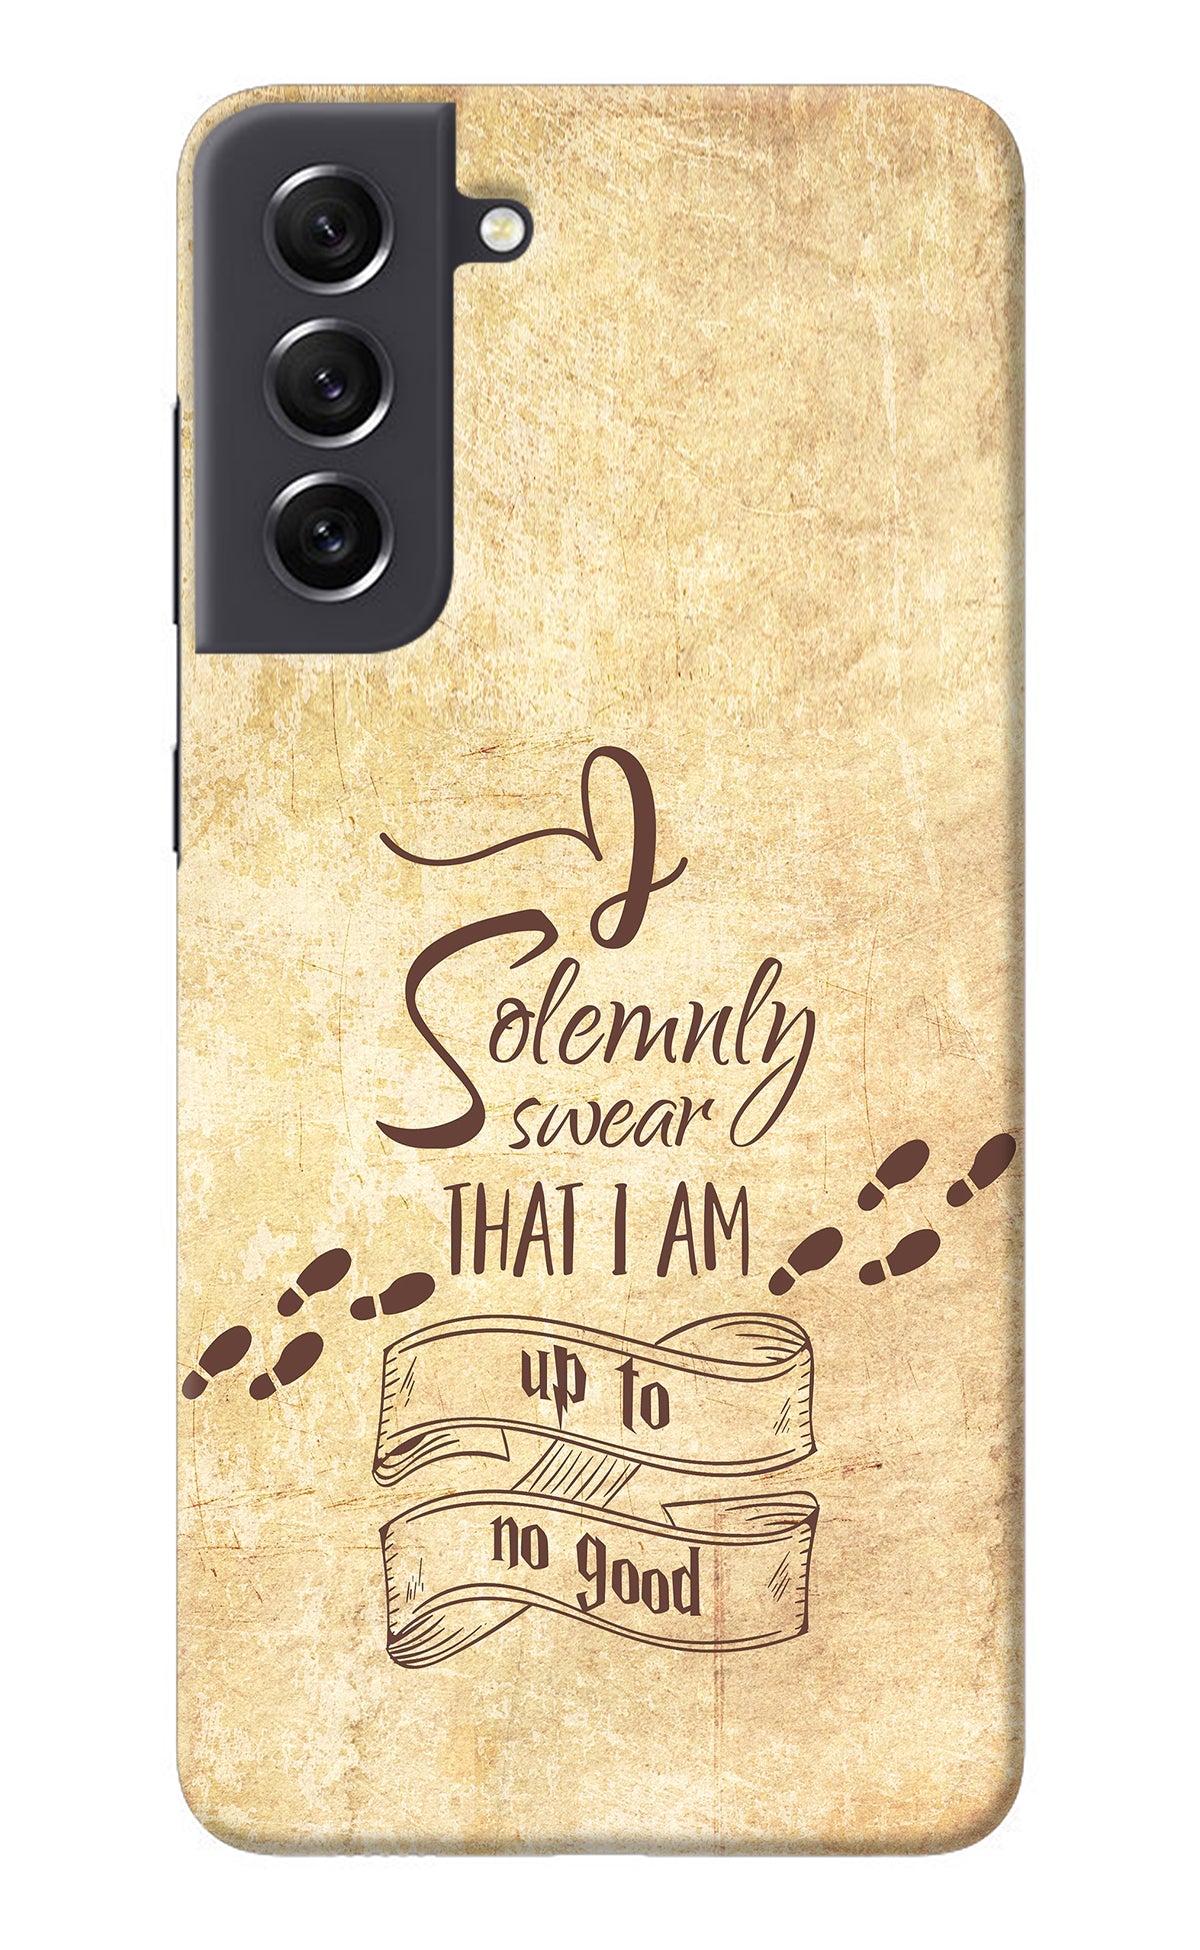 I Solemnly swear that i up to no good Samsung S21 FE 5G Back Cover